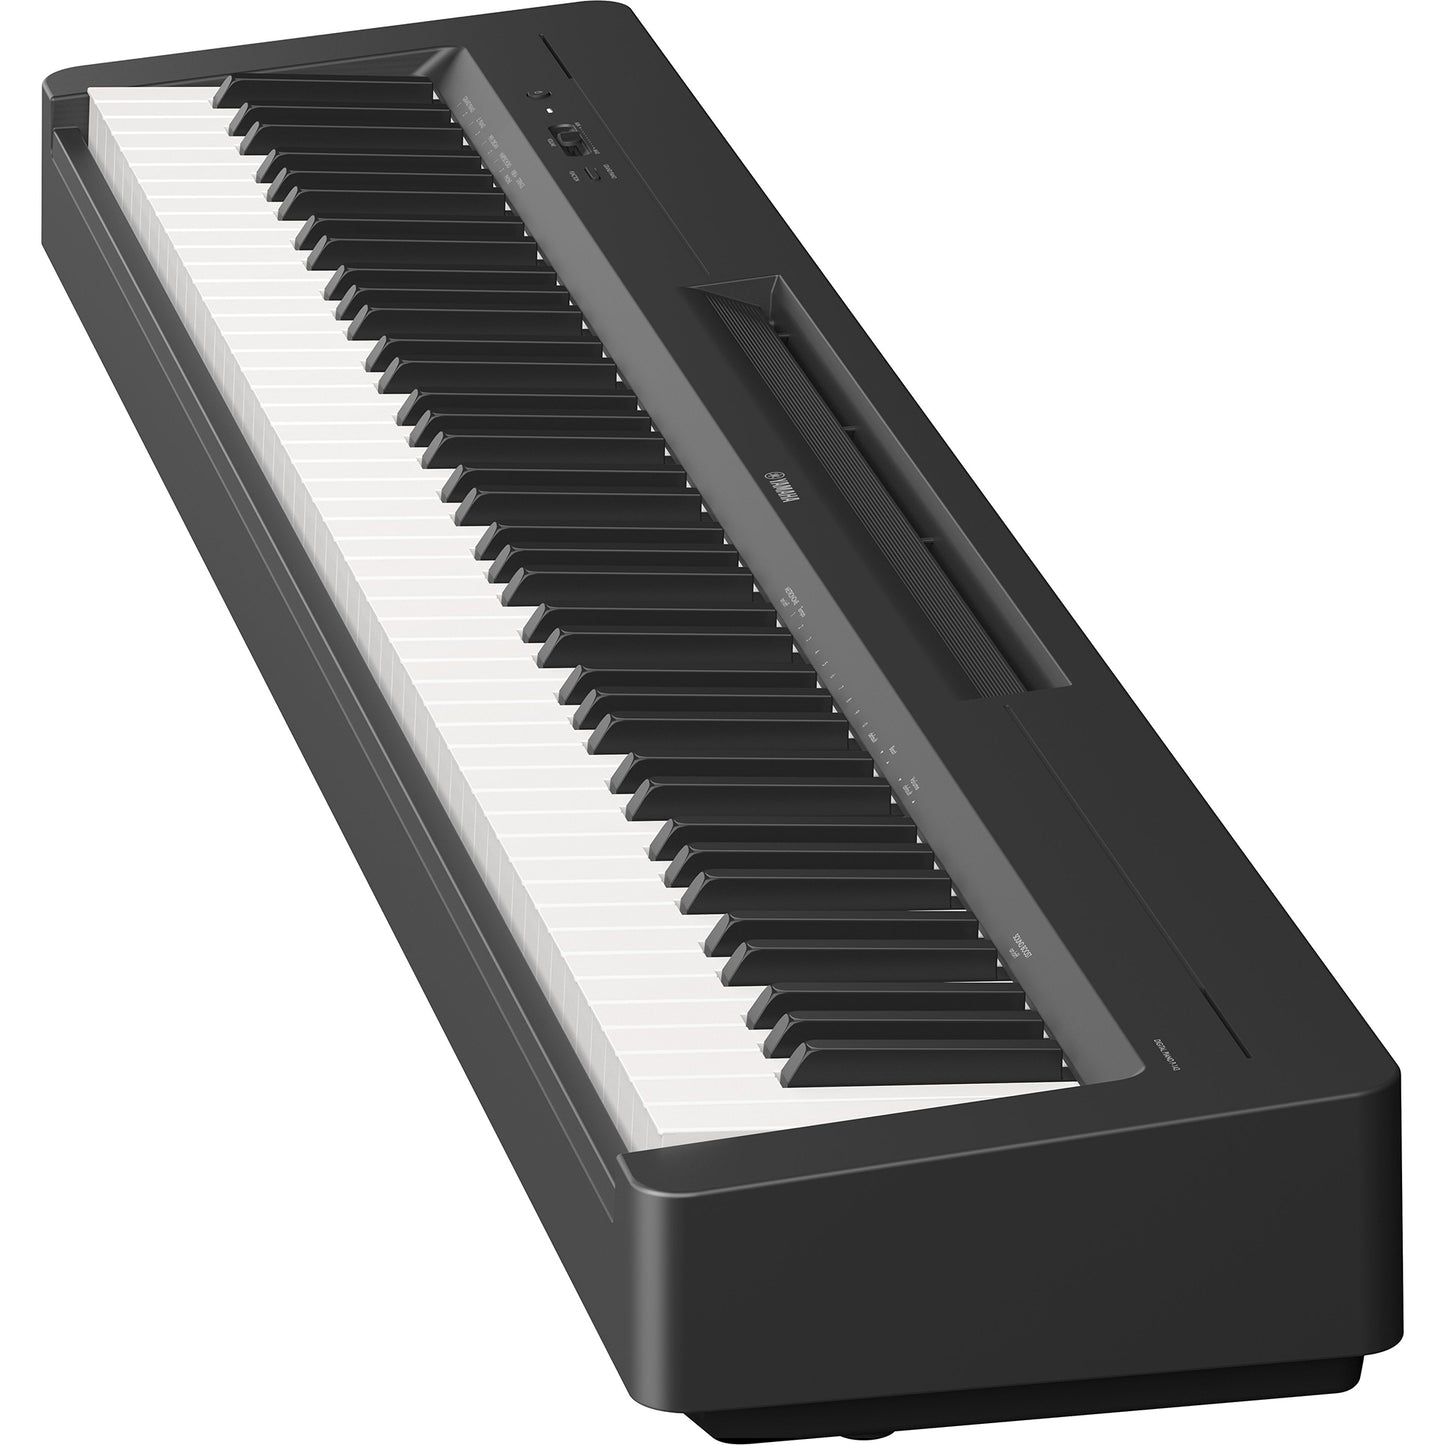 Yamaha P143 88-Note Weighted Action Digital Piano, Black